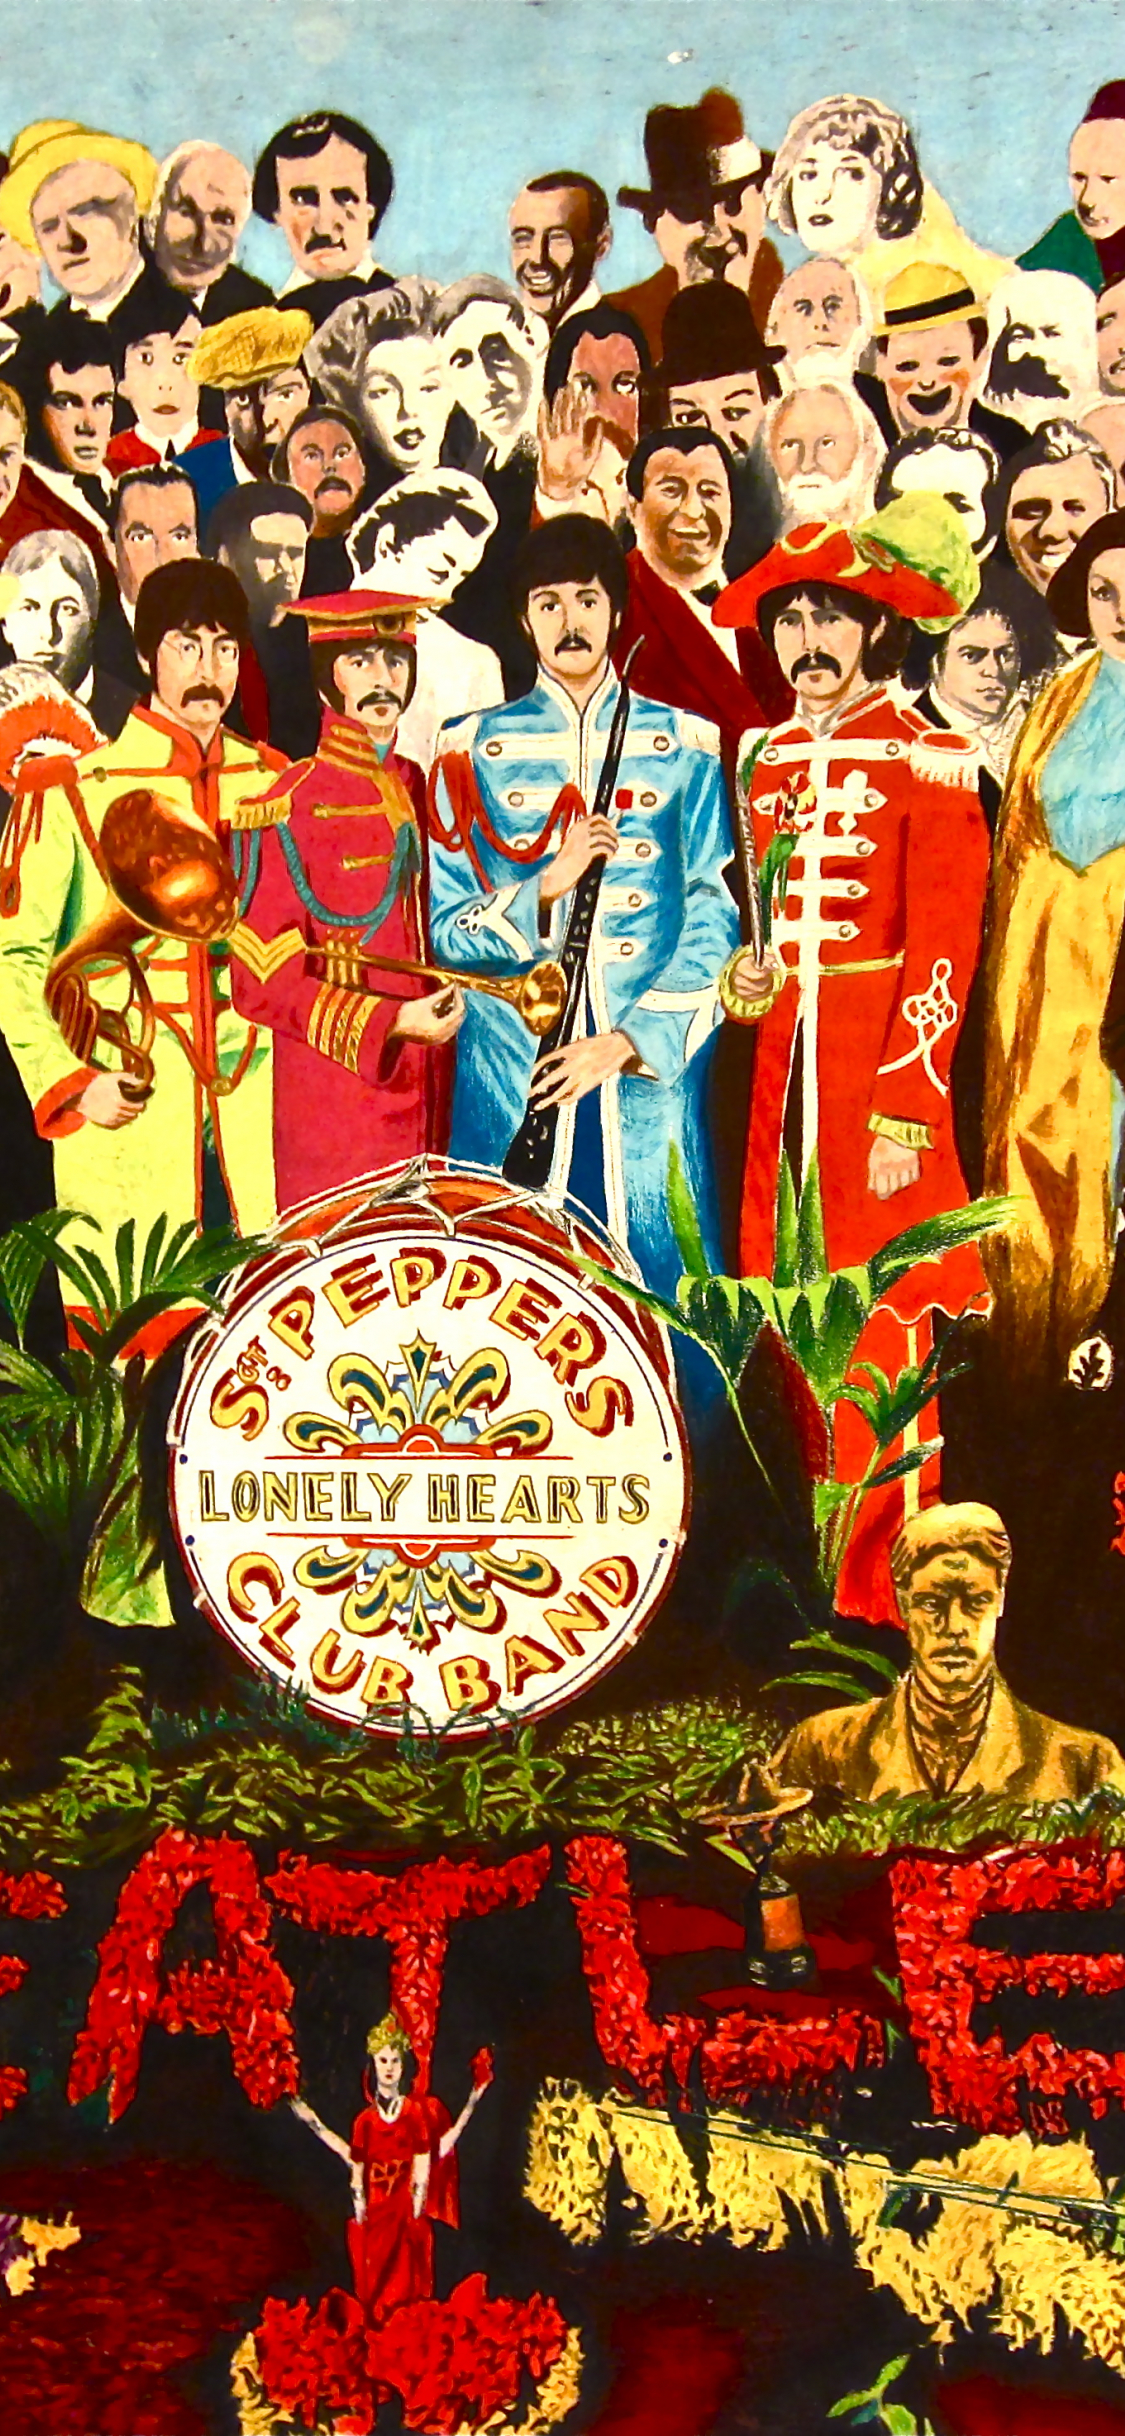 Sgt Peppers Lonely Hearts Club Band Image Crazy